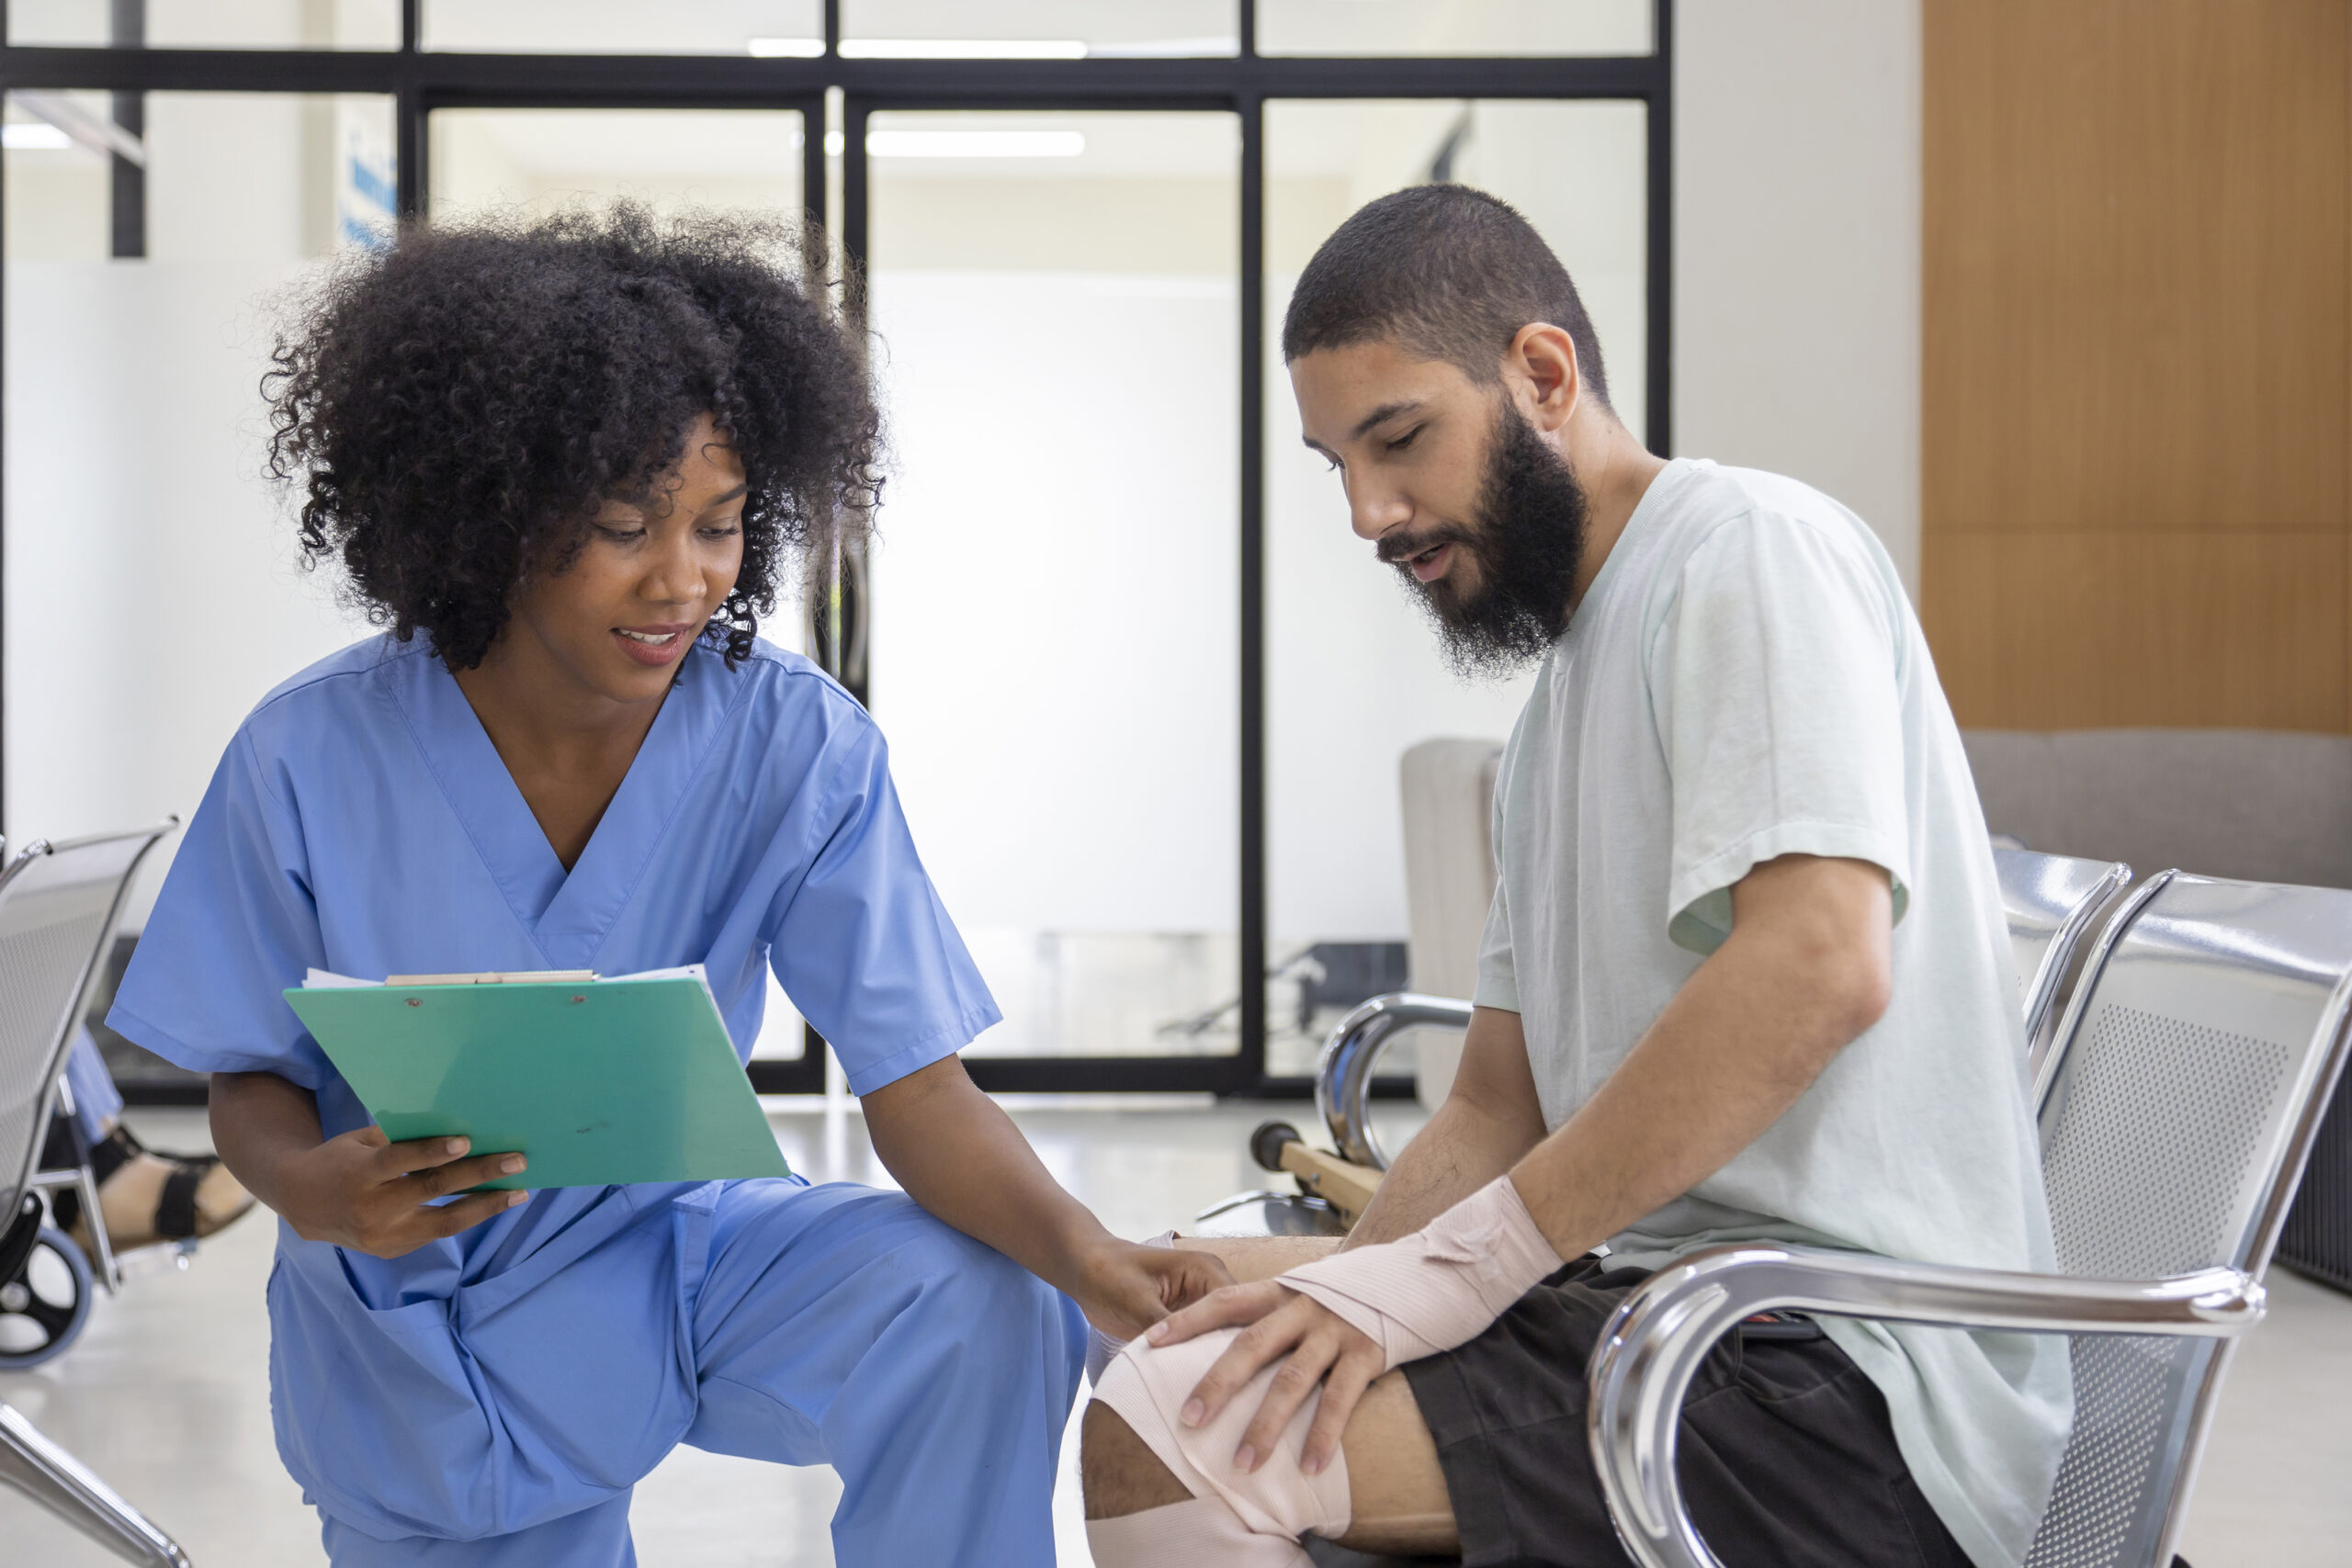 a black, female healthcare worker is kneeling in front of a young injured man with a beard in a hospital or medical setting.